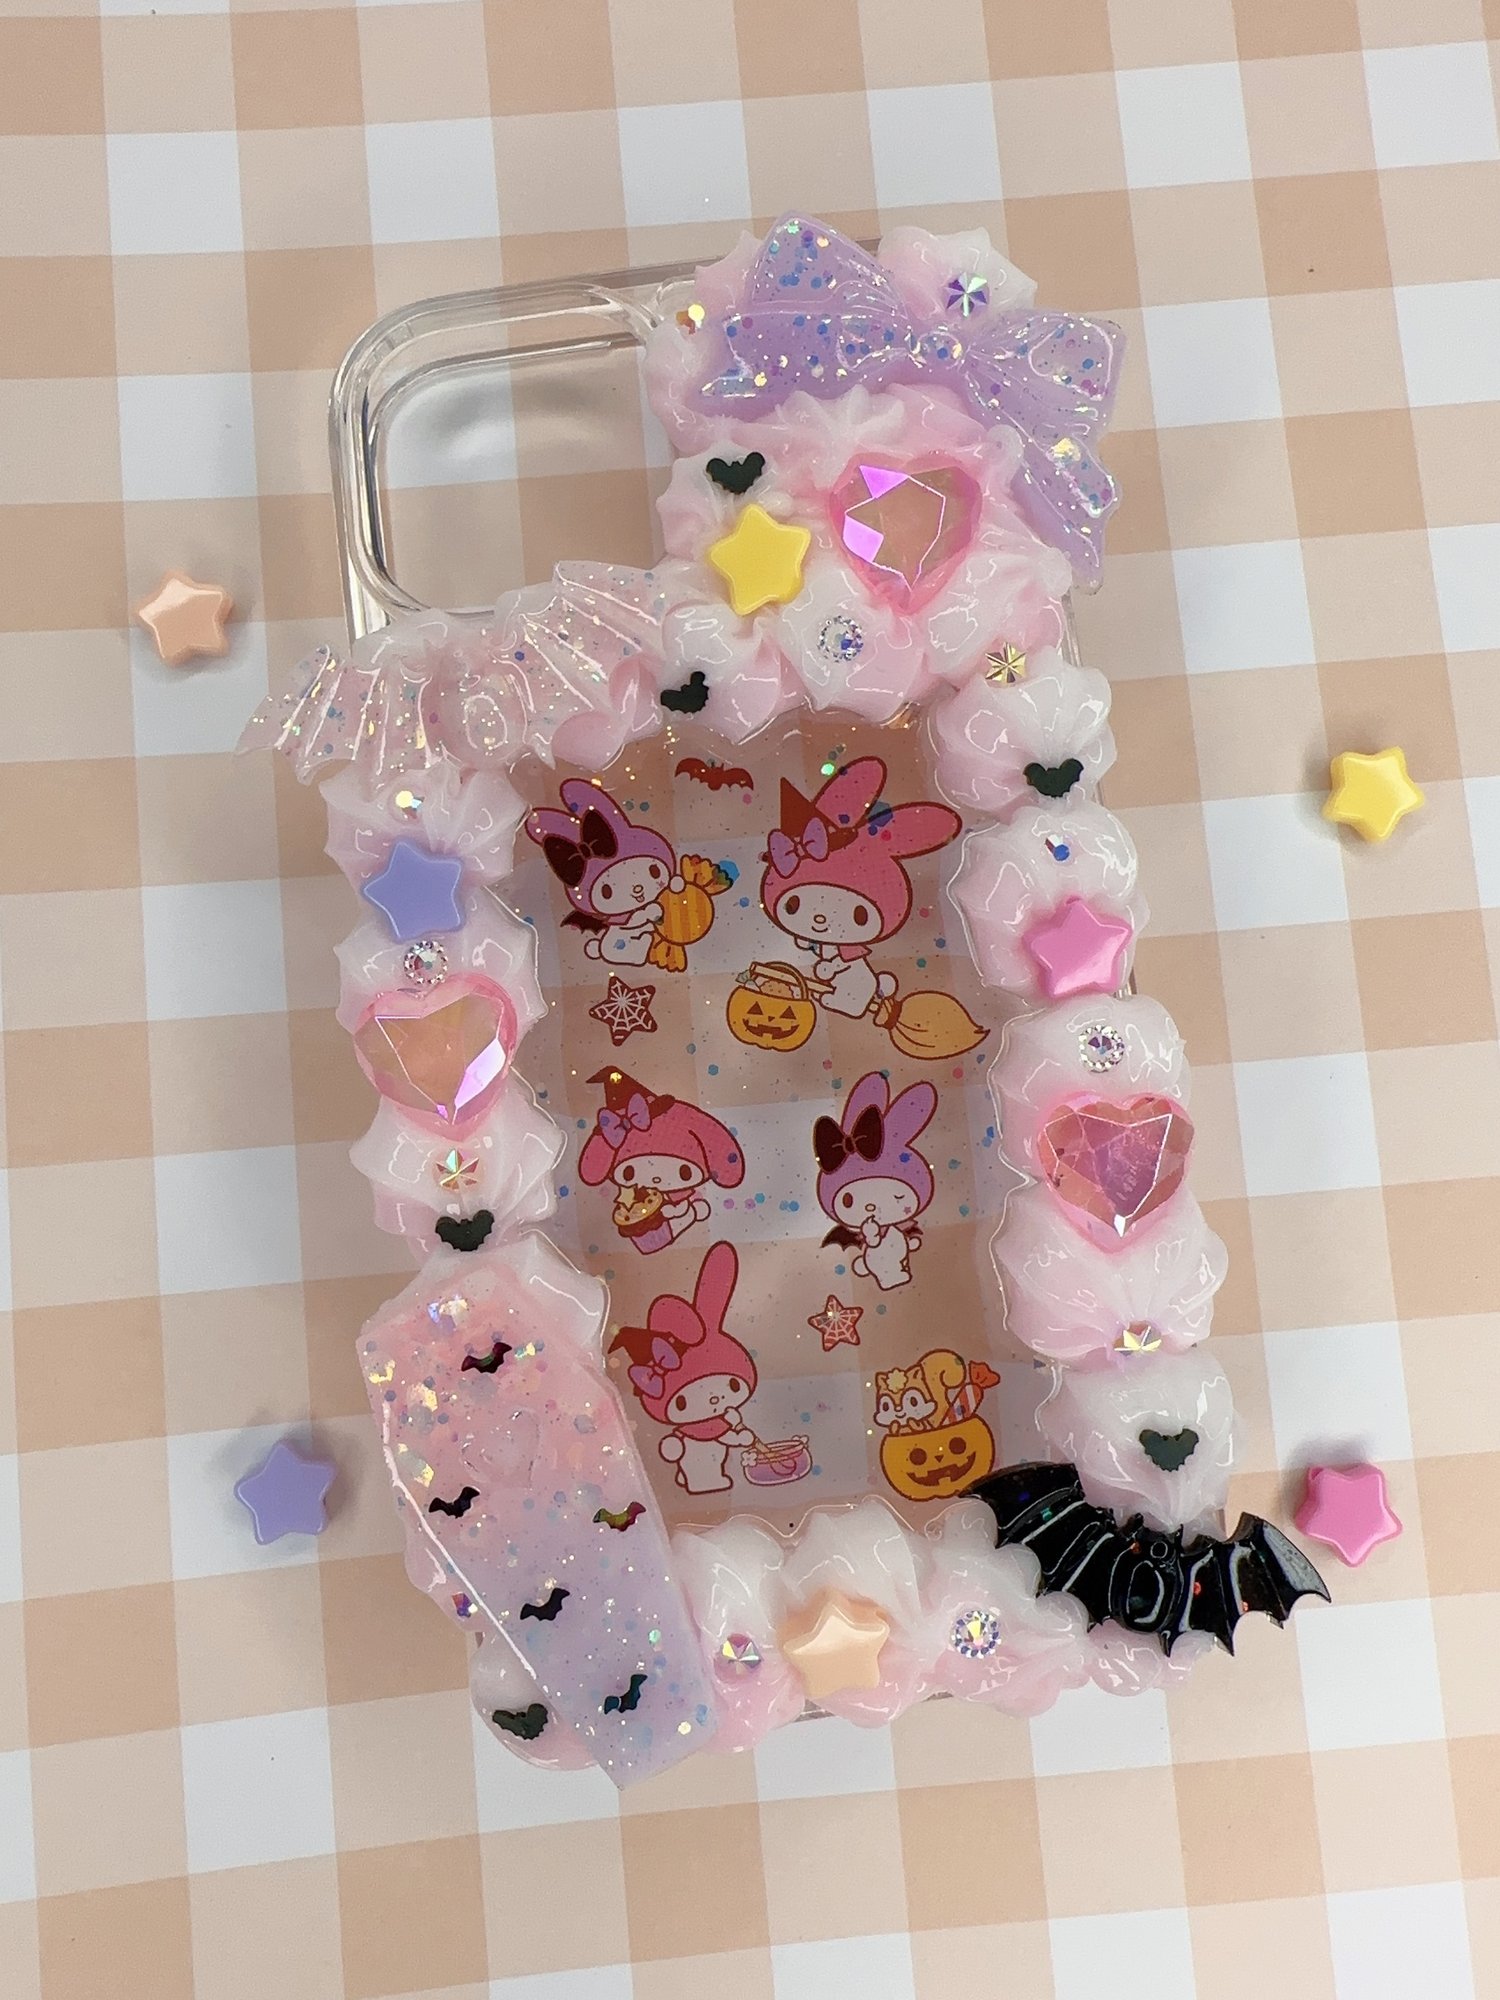 https://assets.bigcartel.com/product_images/9f1a9e52-6bc4-4d32-8a3a-bed99ddbf74e/iphone-14-halloween-melody-decoden-phone-case.jpg?auto=format&fit=max&w=1500